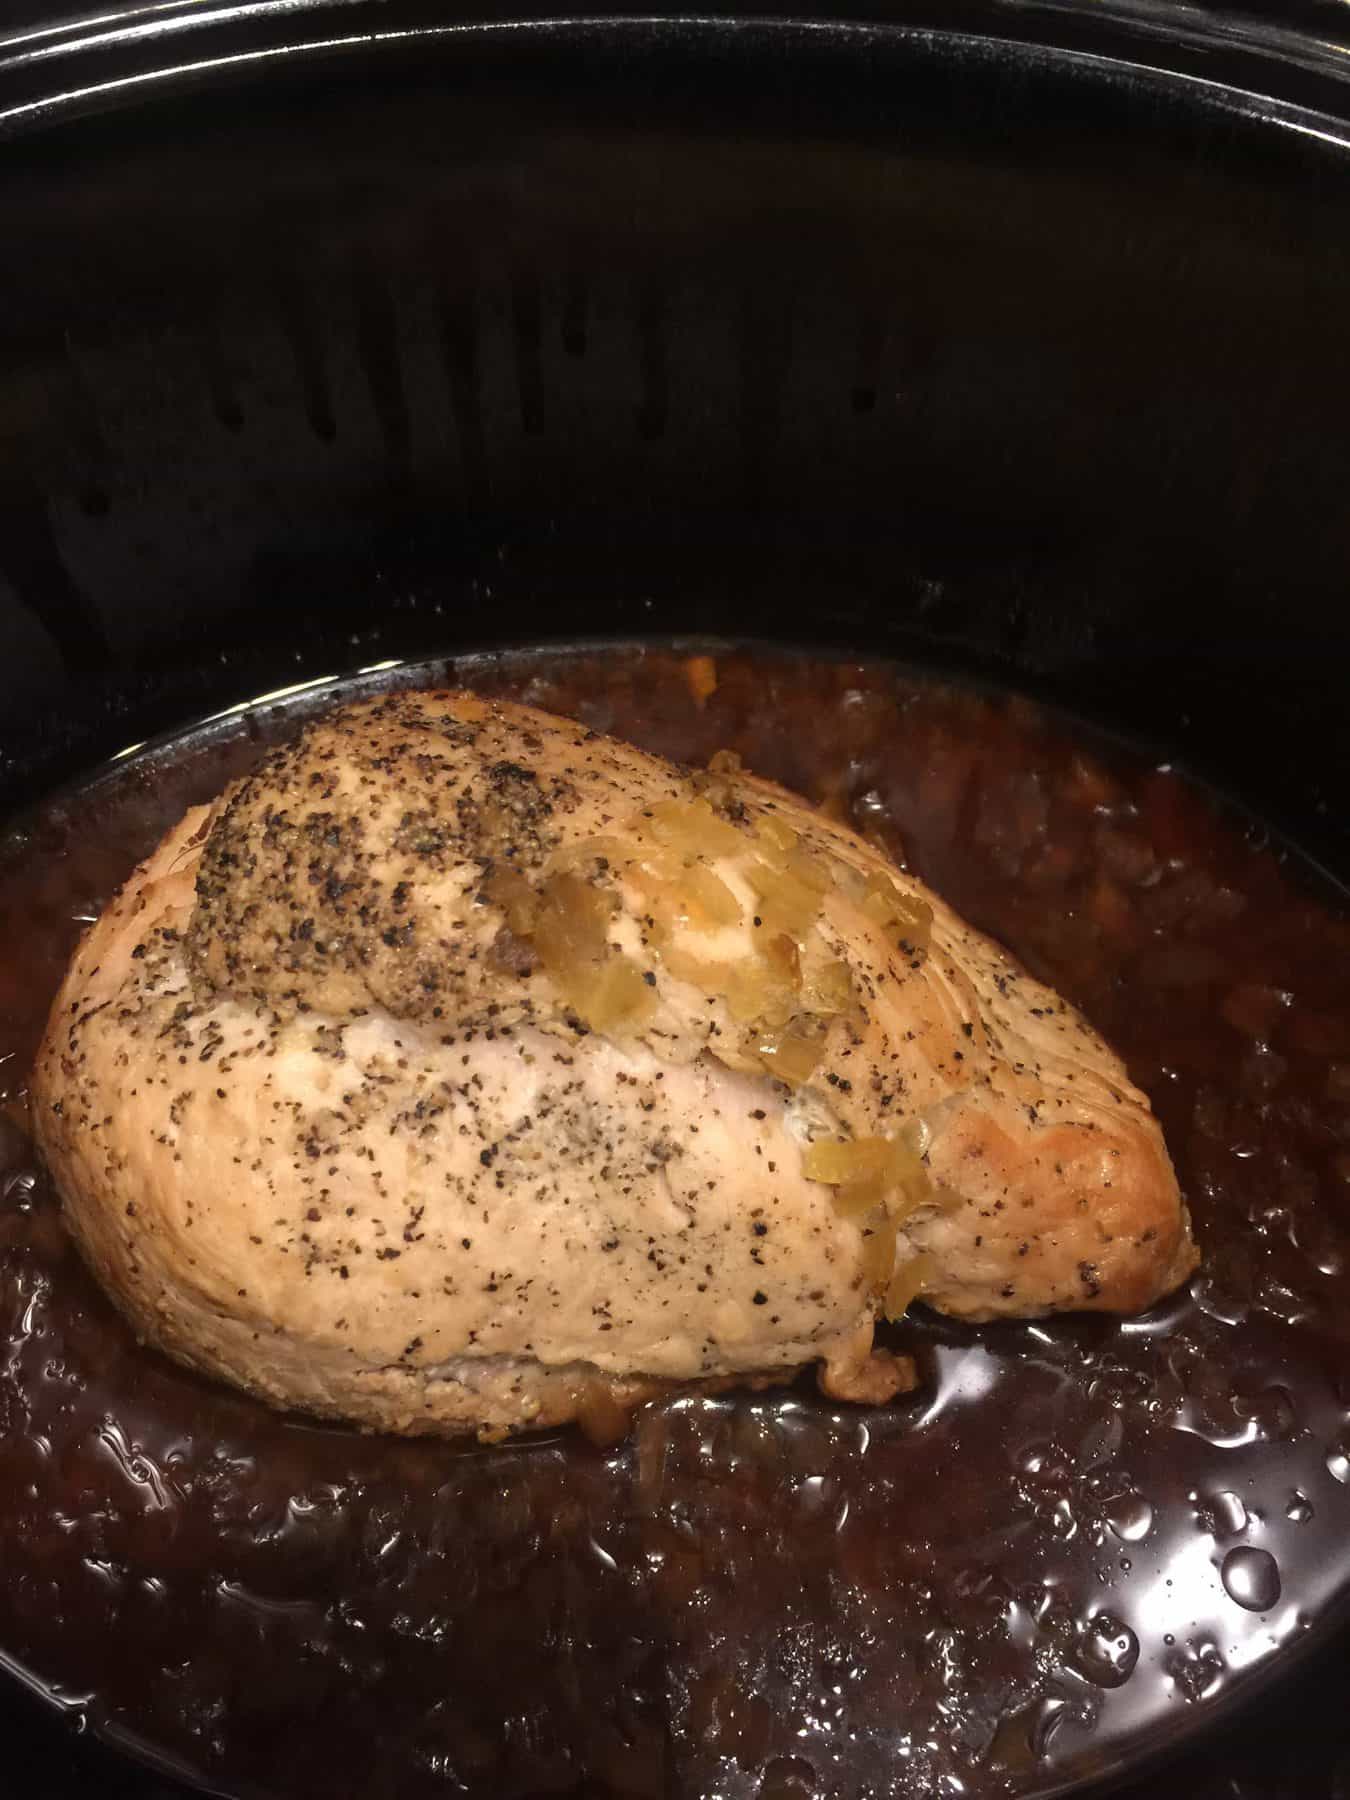 Picture of cooked pork roast and onions with root beer in a slow cooker.